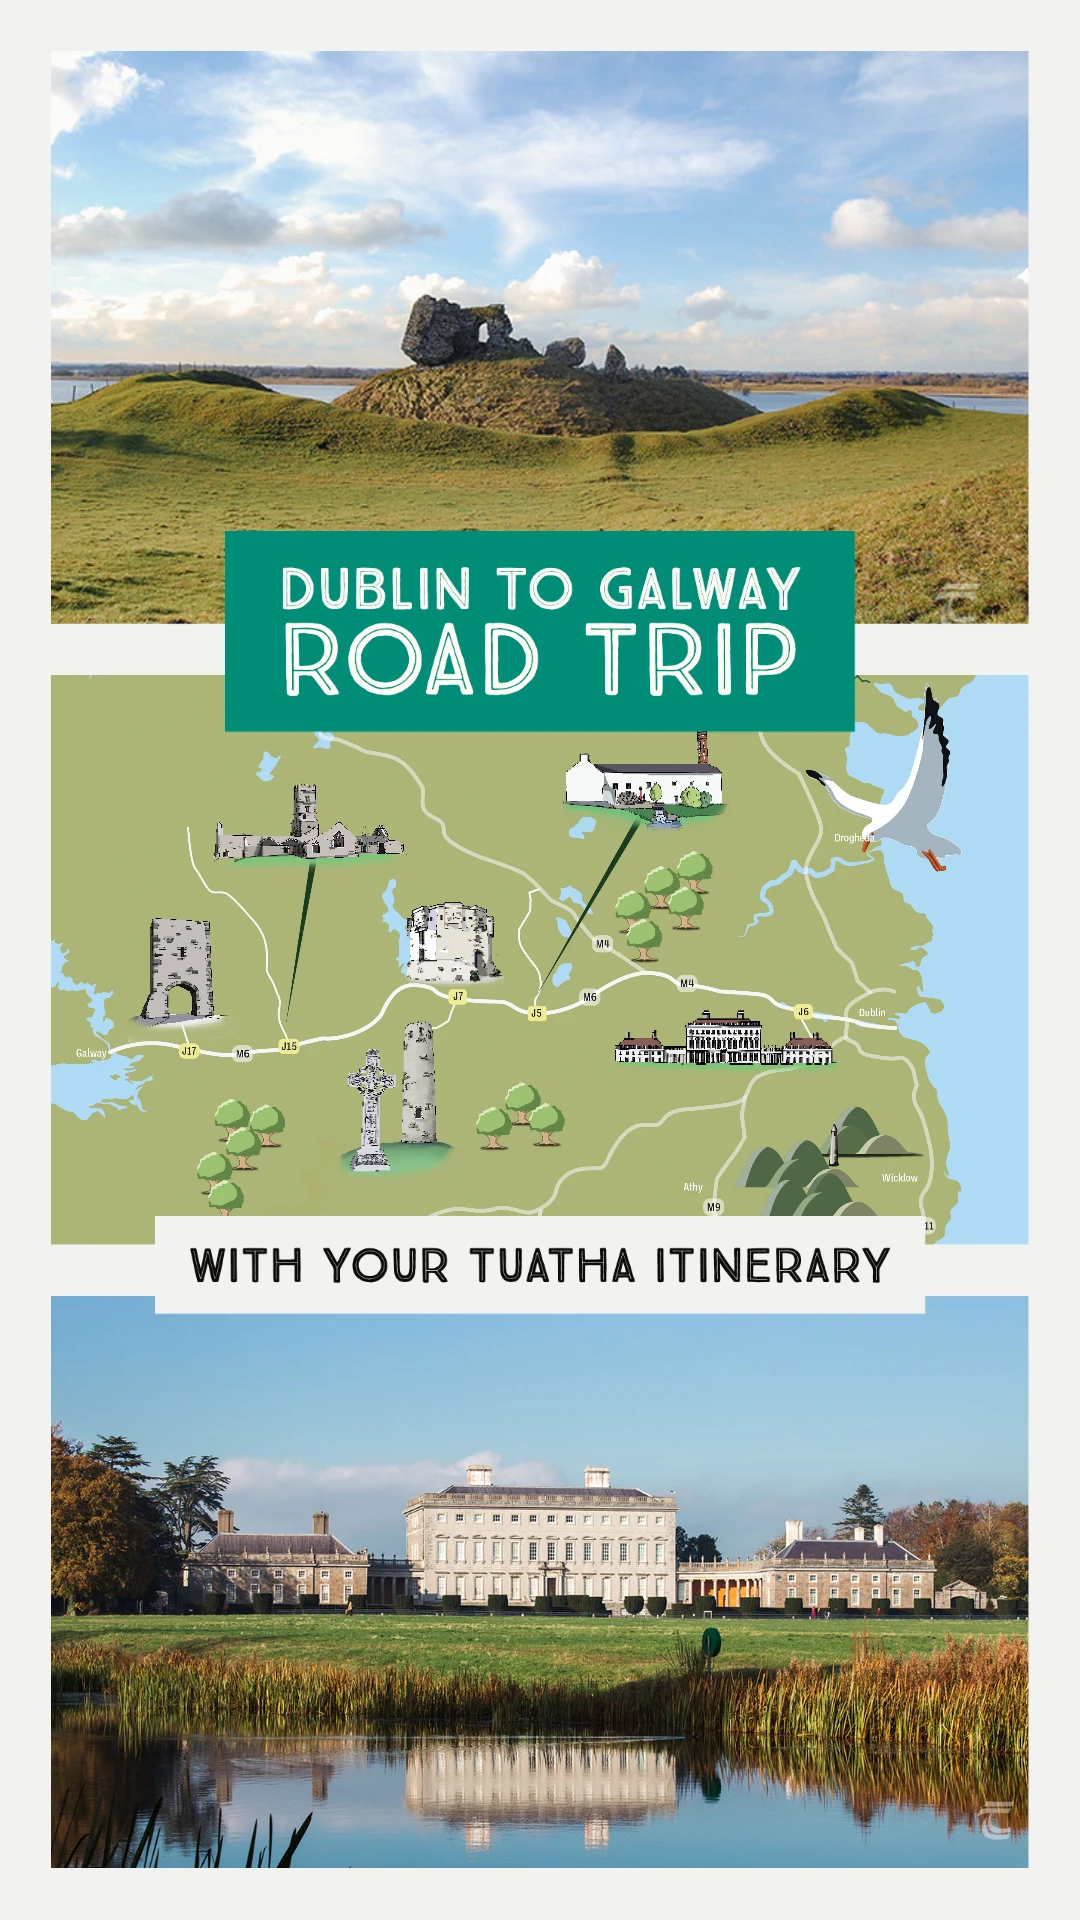 The Dublin to Galway Itinerary